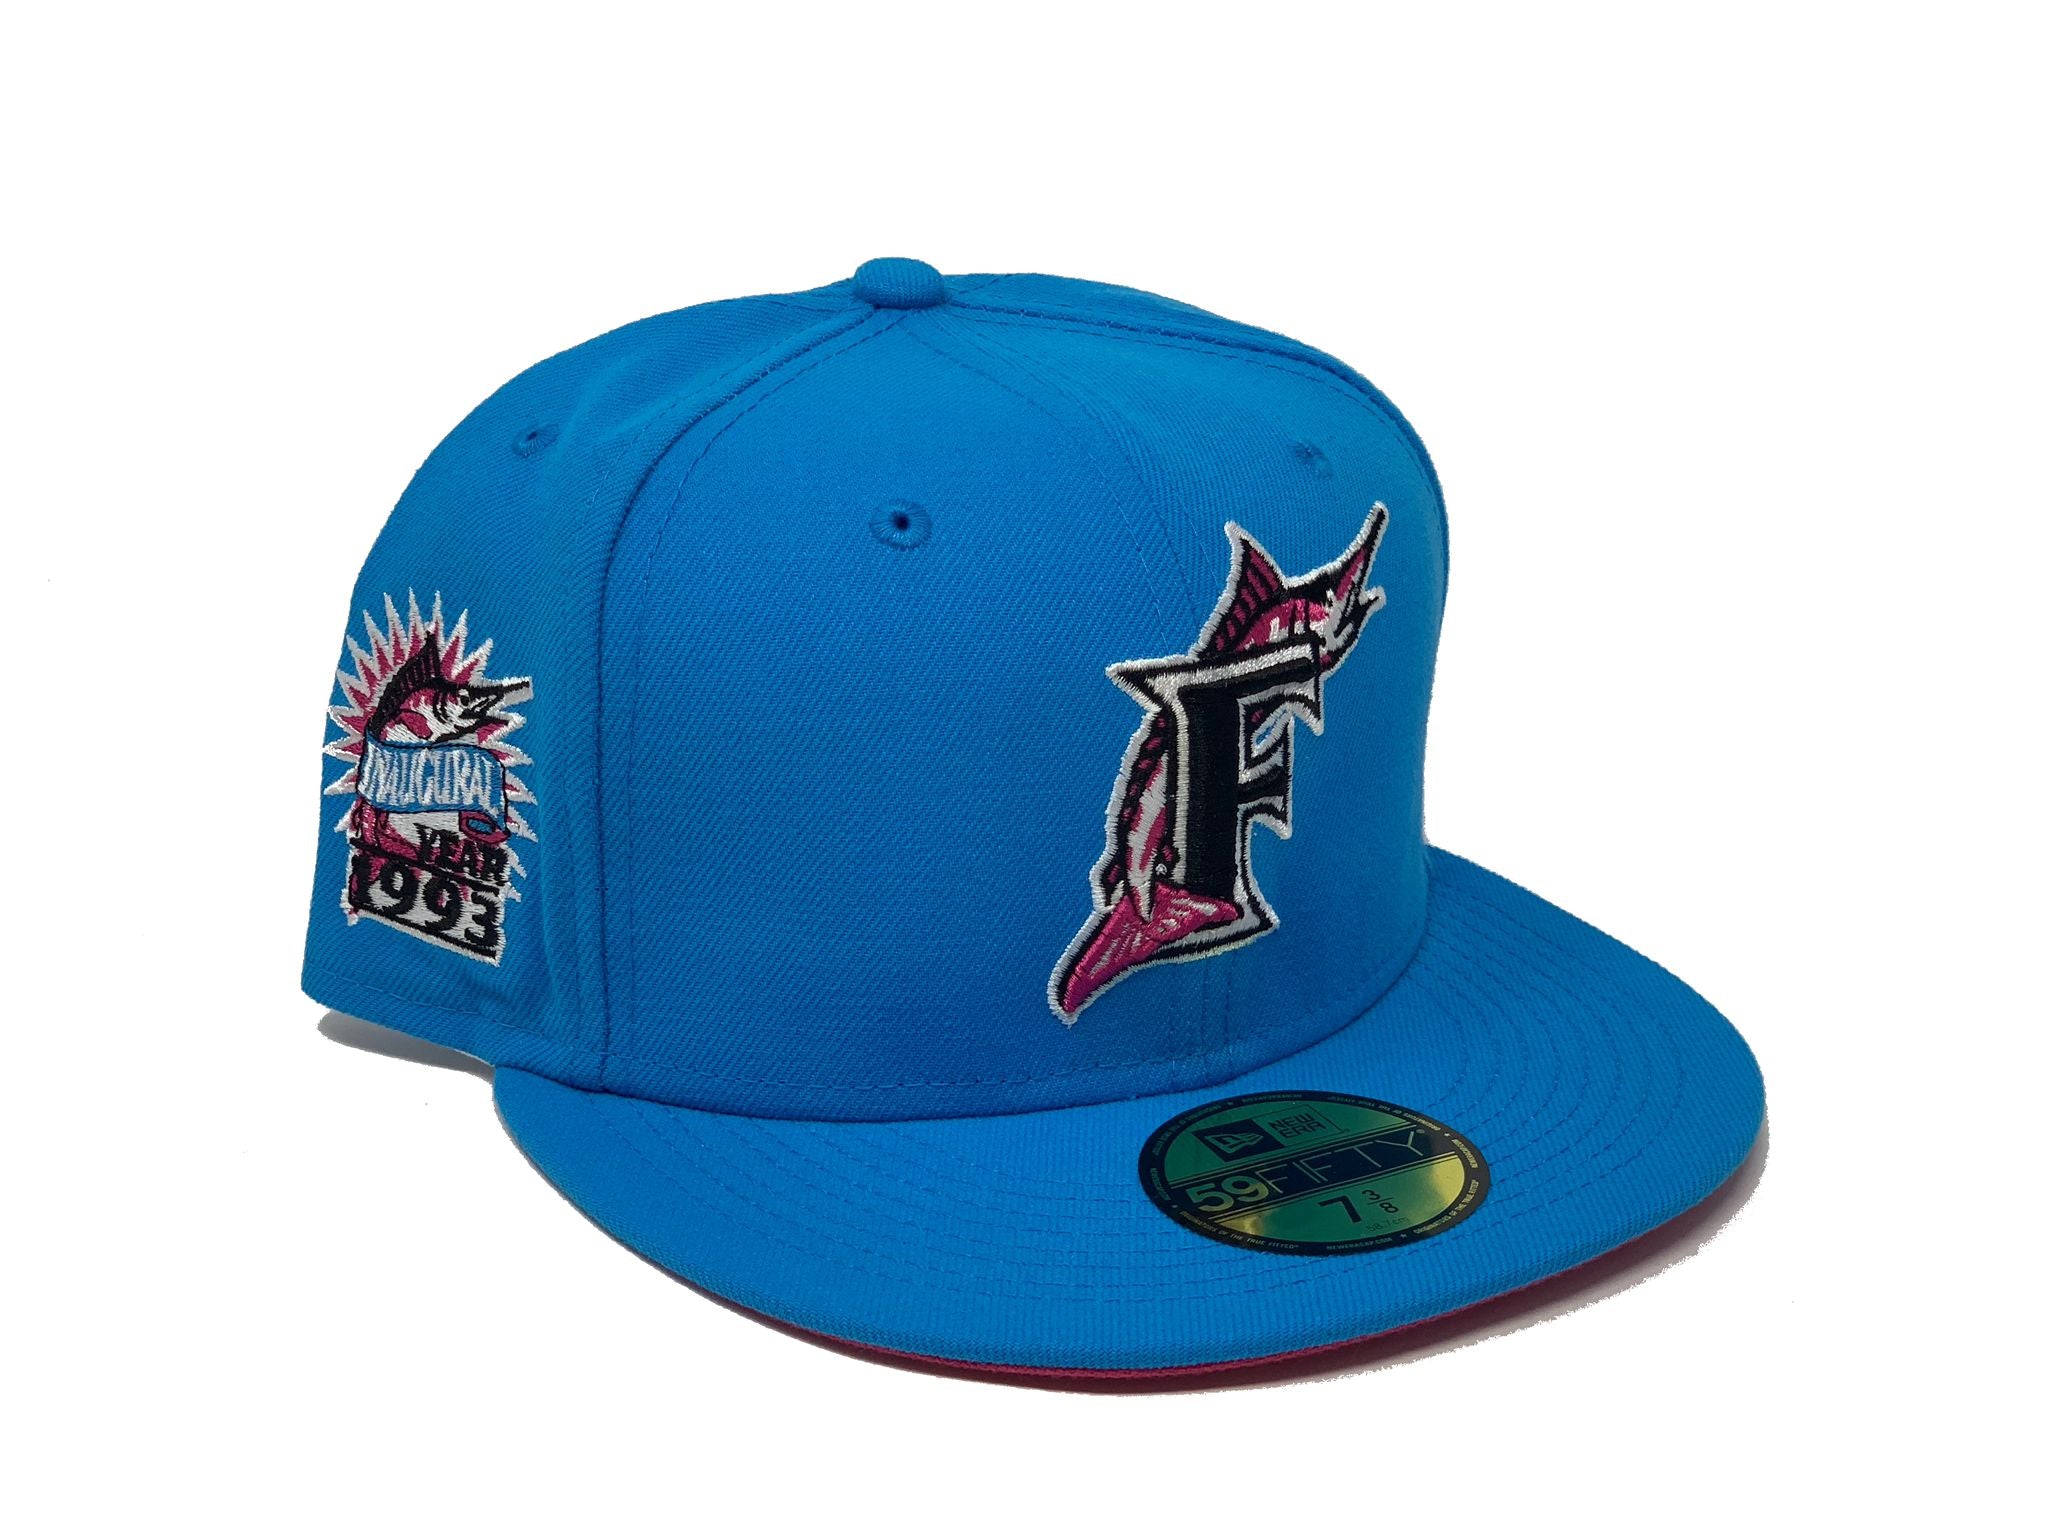 New Era and the Marlins bring neon to baseball, with mixed results 